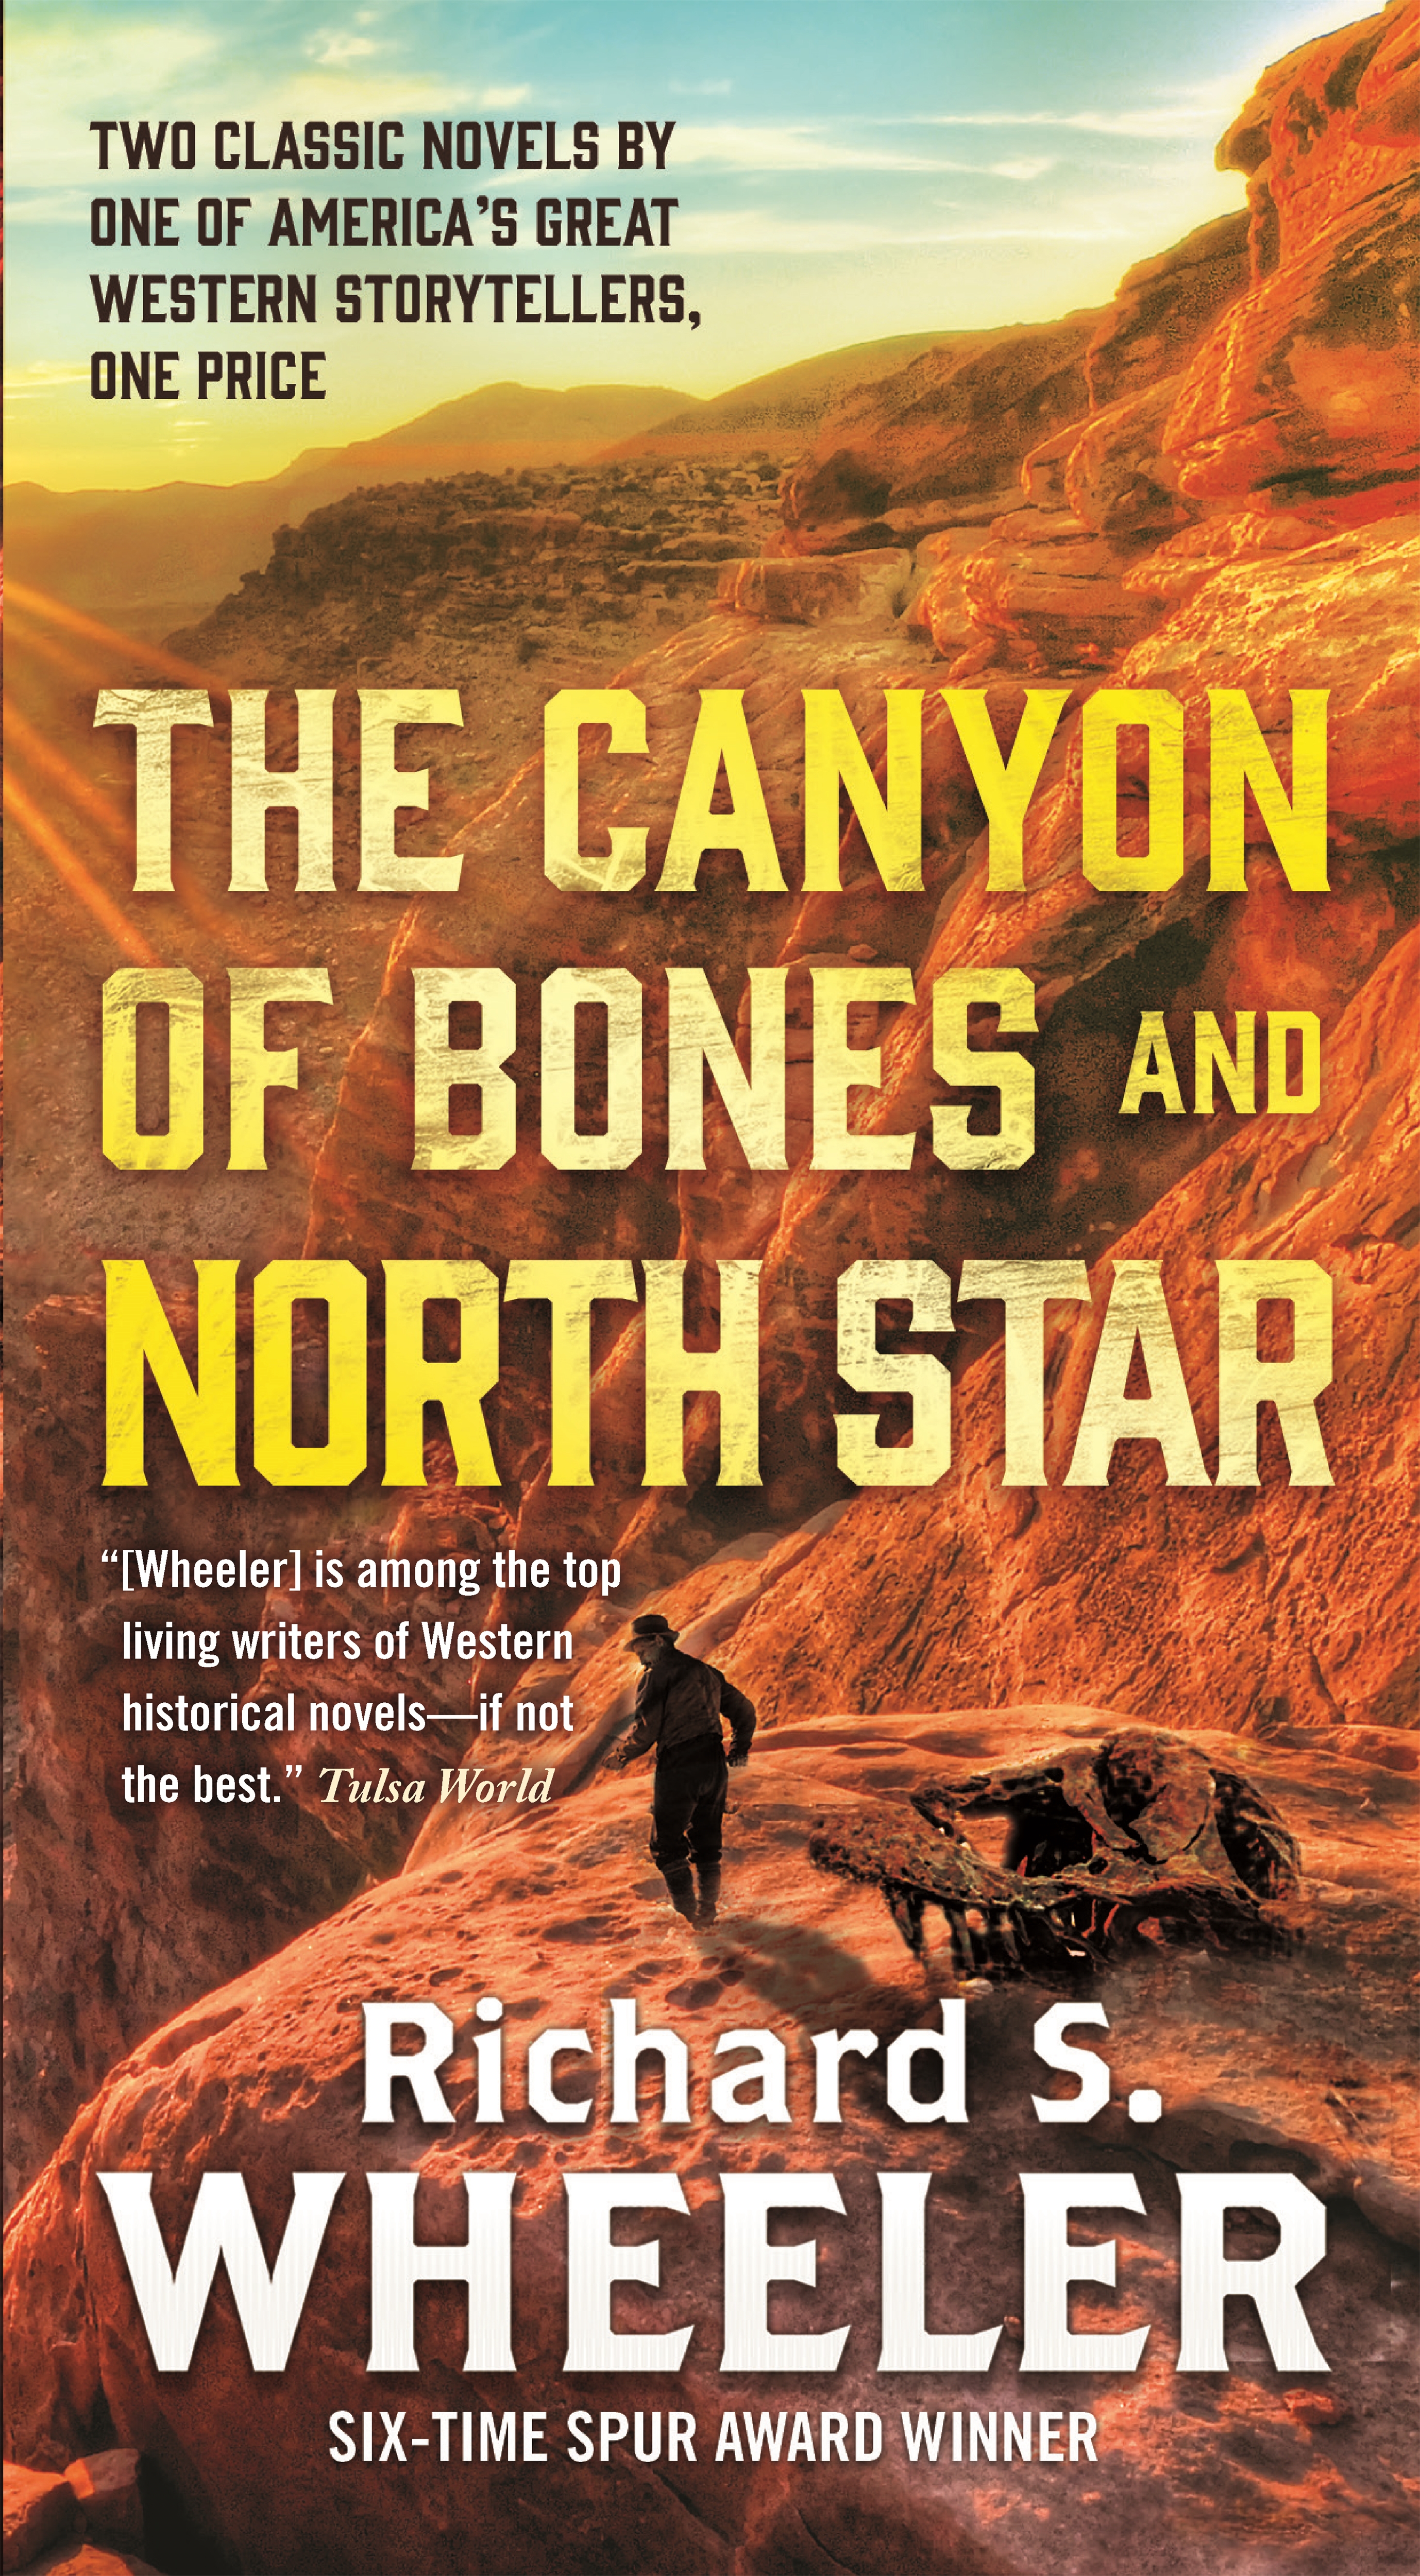 The Canyon of Bones and North Star by Richard S. Wheeler